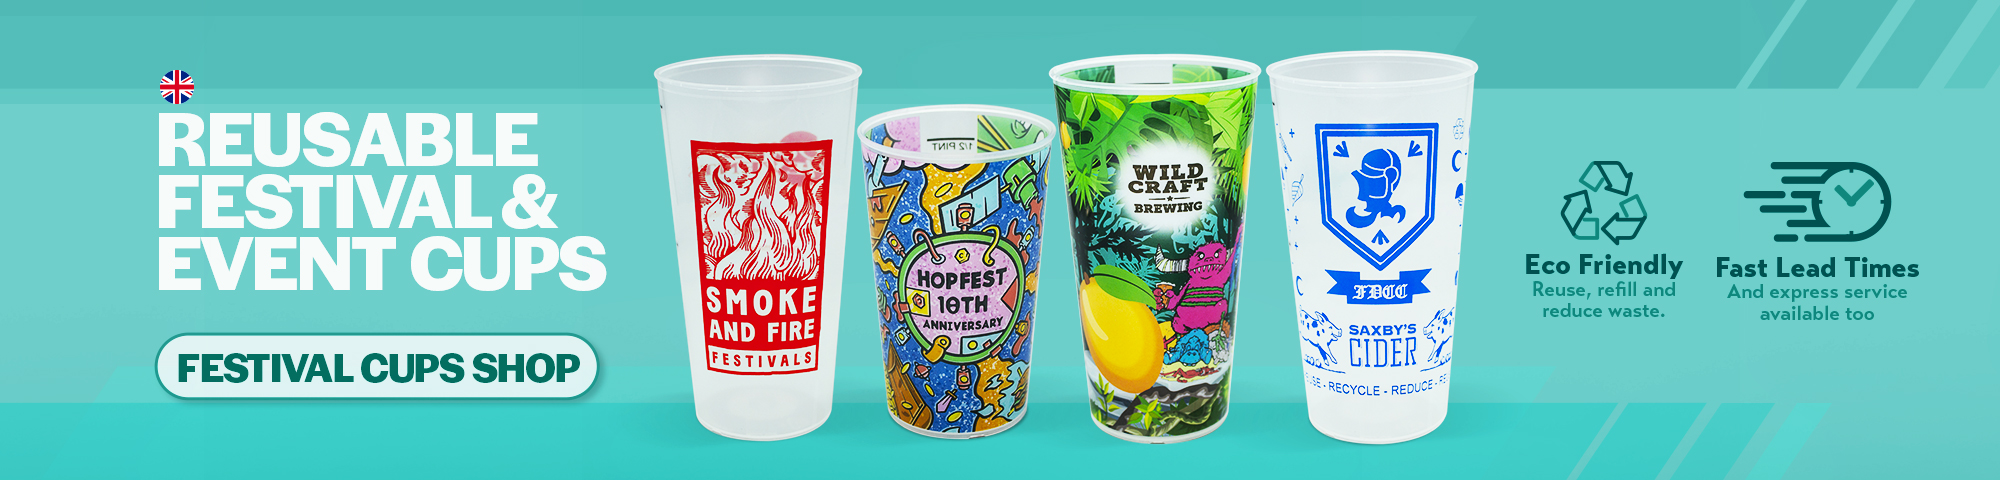 Reusable Event and Festival Cups